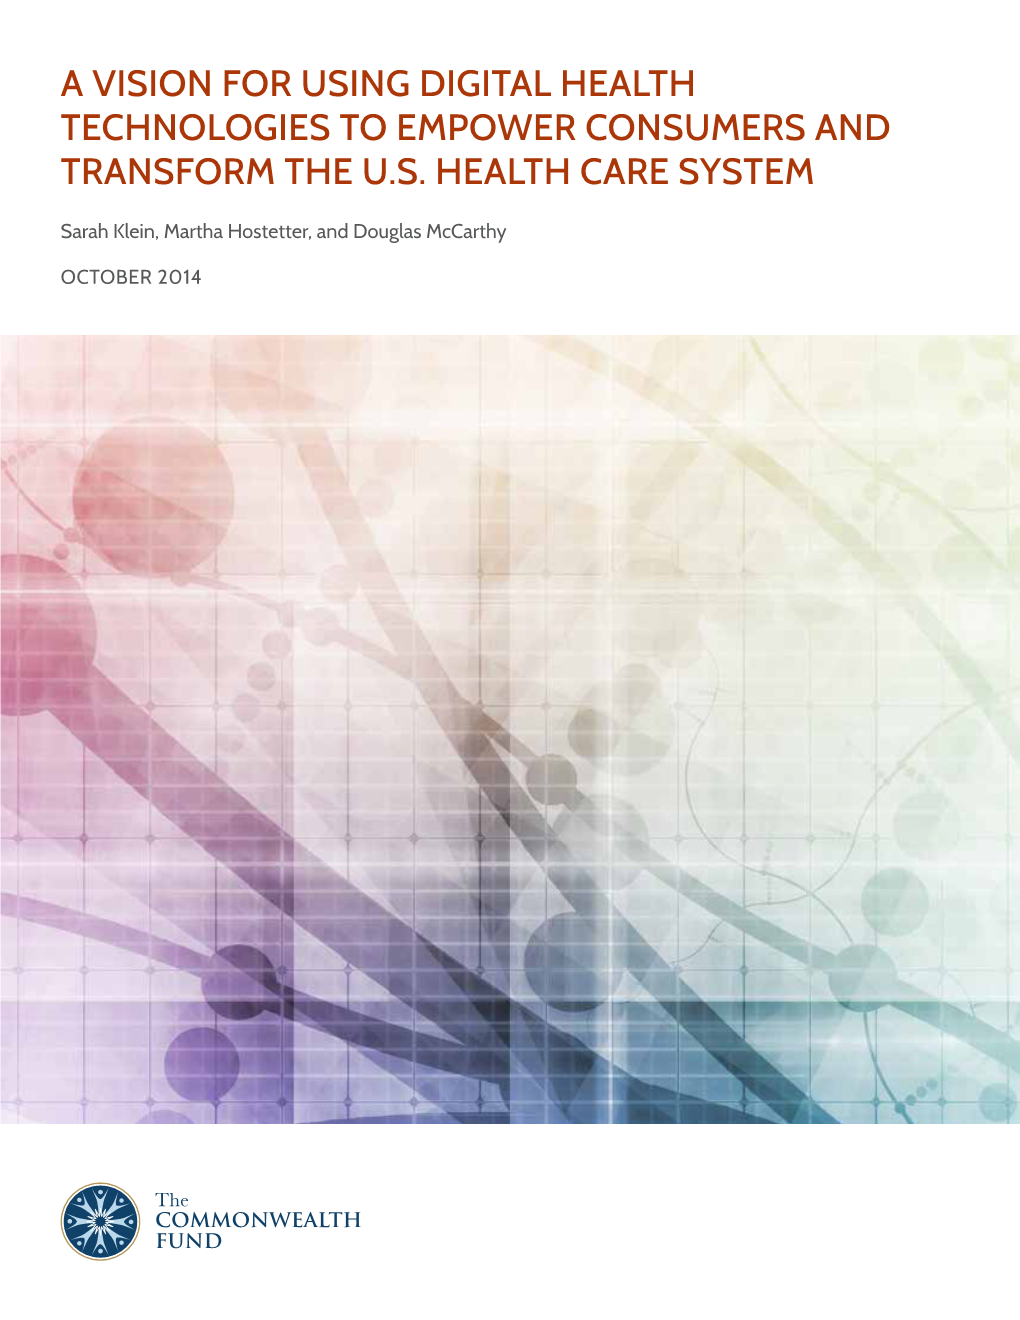 A Vision for Using Digital Health Technologies to Empower Consumers and Transform the U.S